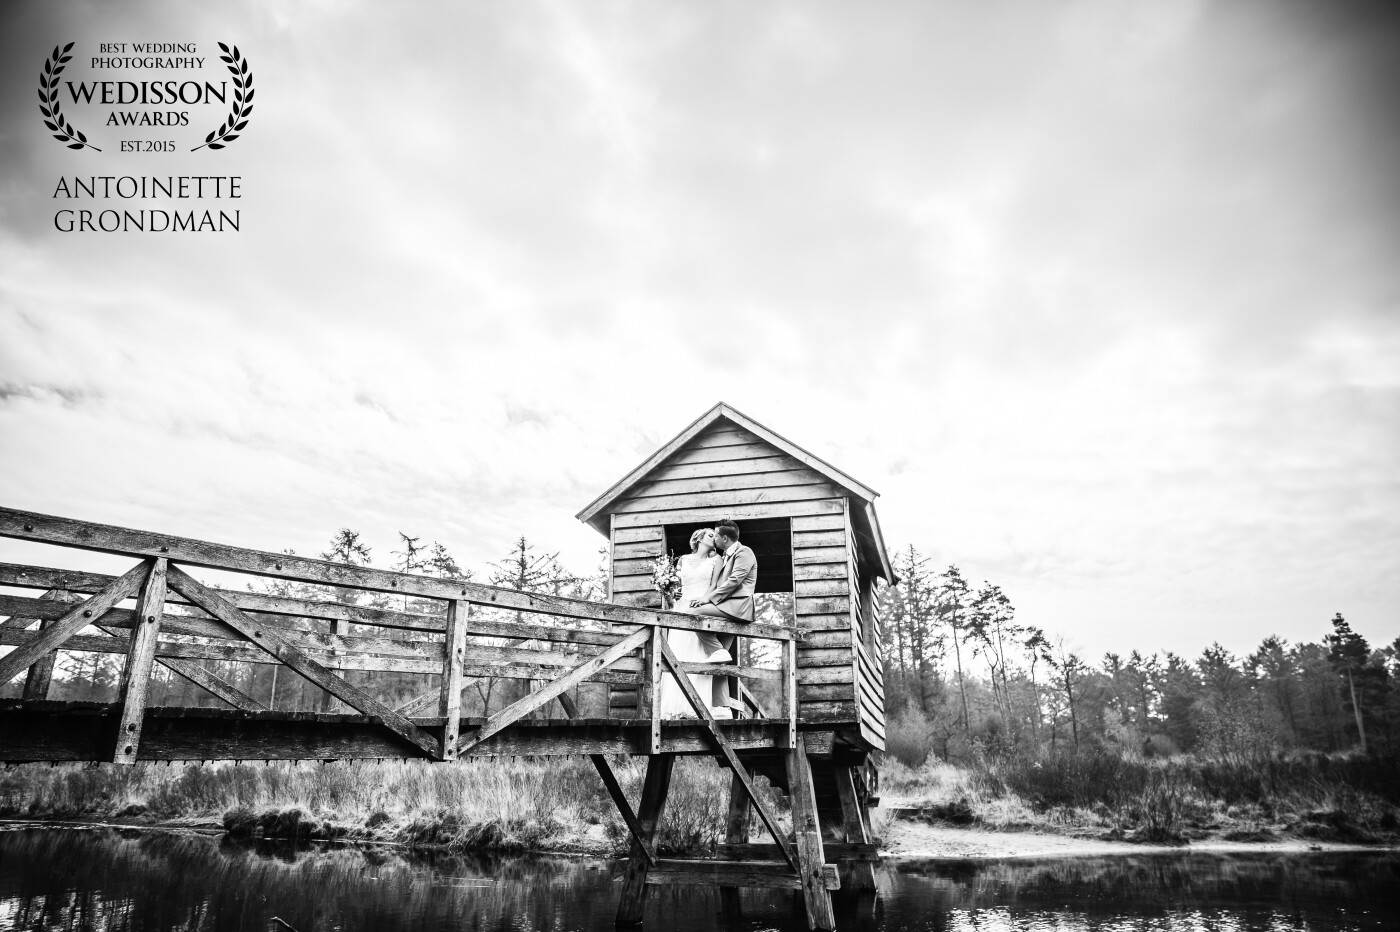 This was a really fun couple! They trusted me completely (and had so much patience!). The sky, water and the wooden shed were the perfect setting, the bride and groom complete it. 